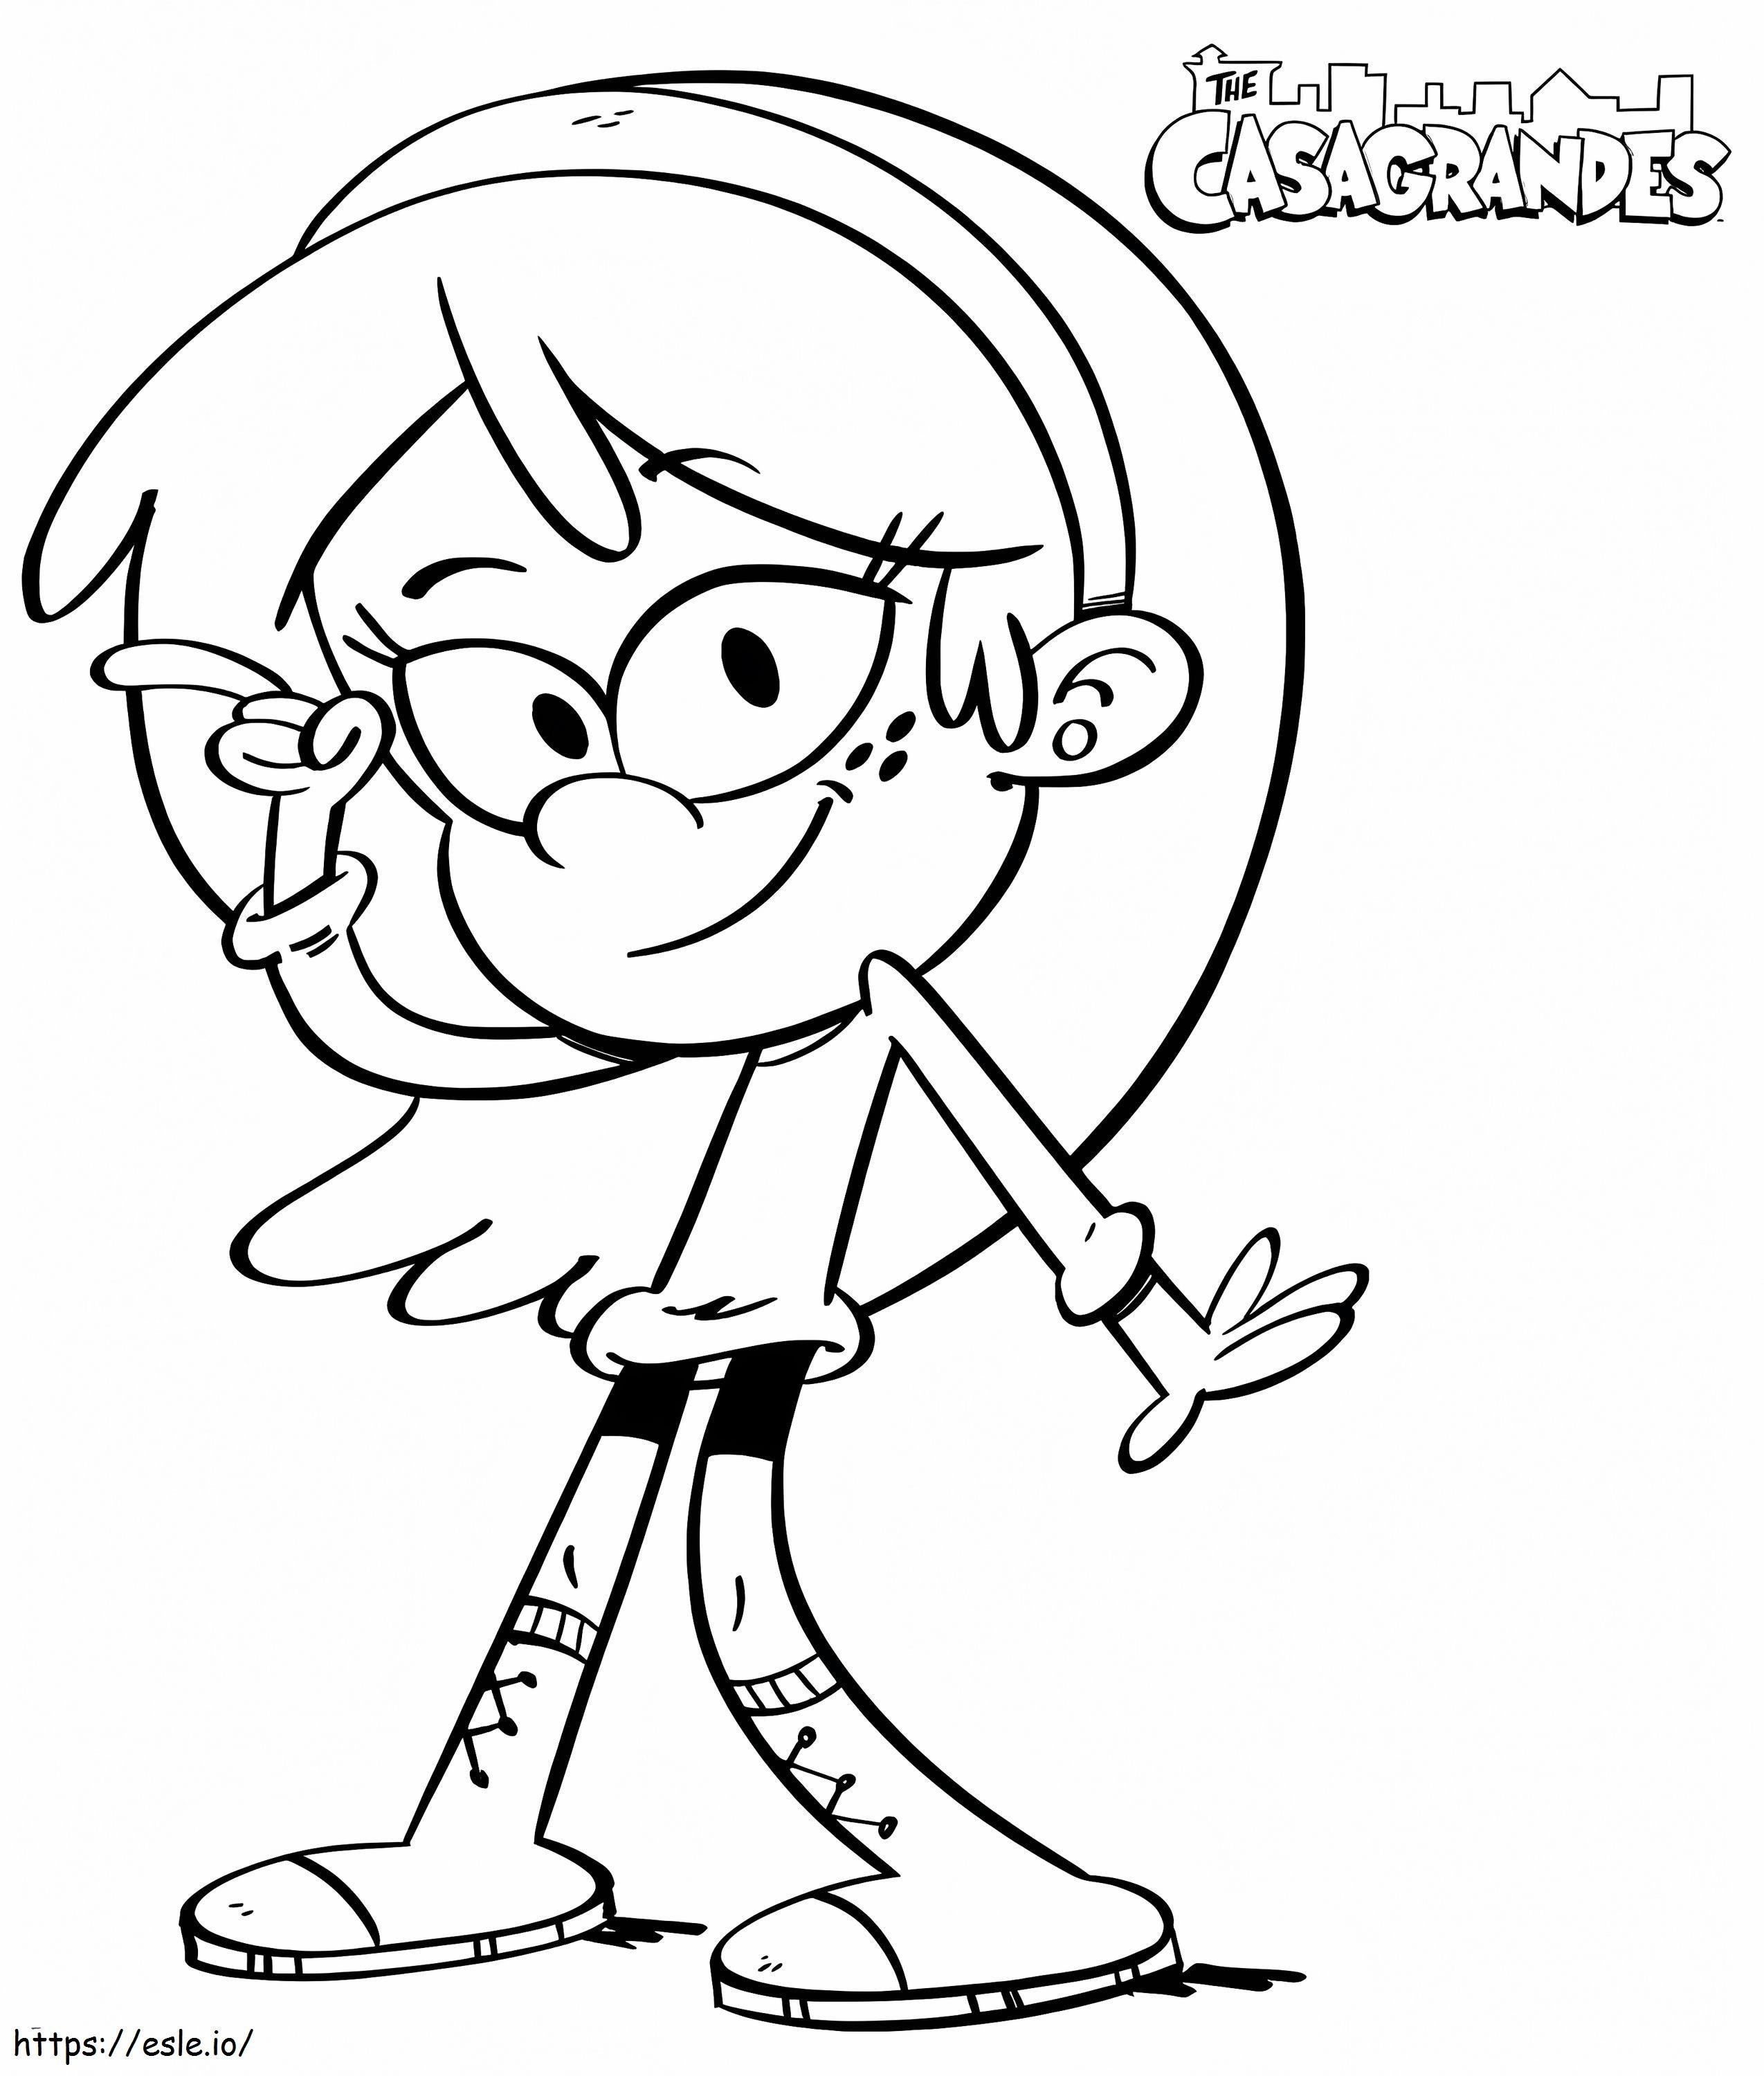 Lori Loud From The Casagrandes coloring page